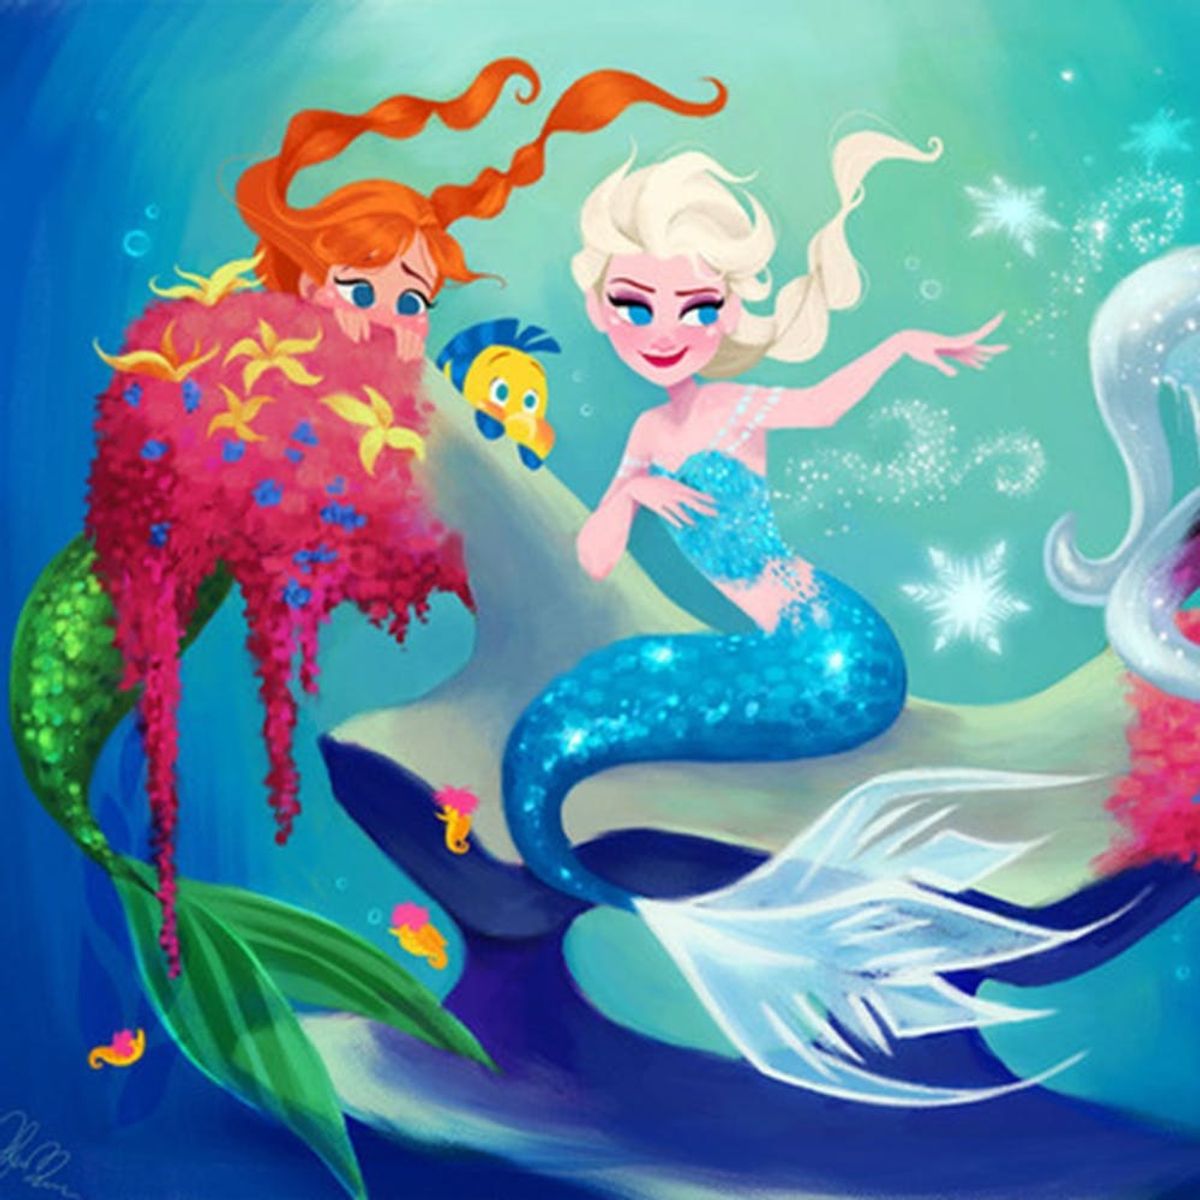 See How This Artist Imagines Disney Princesses as OTHER Disney Princesses